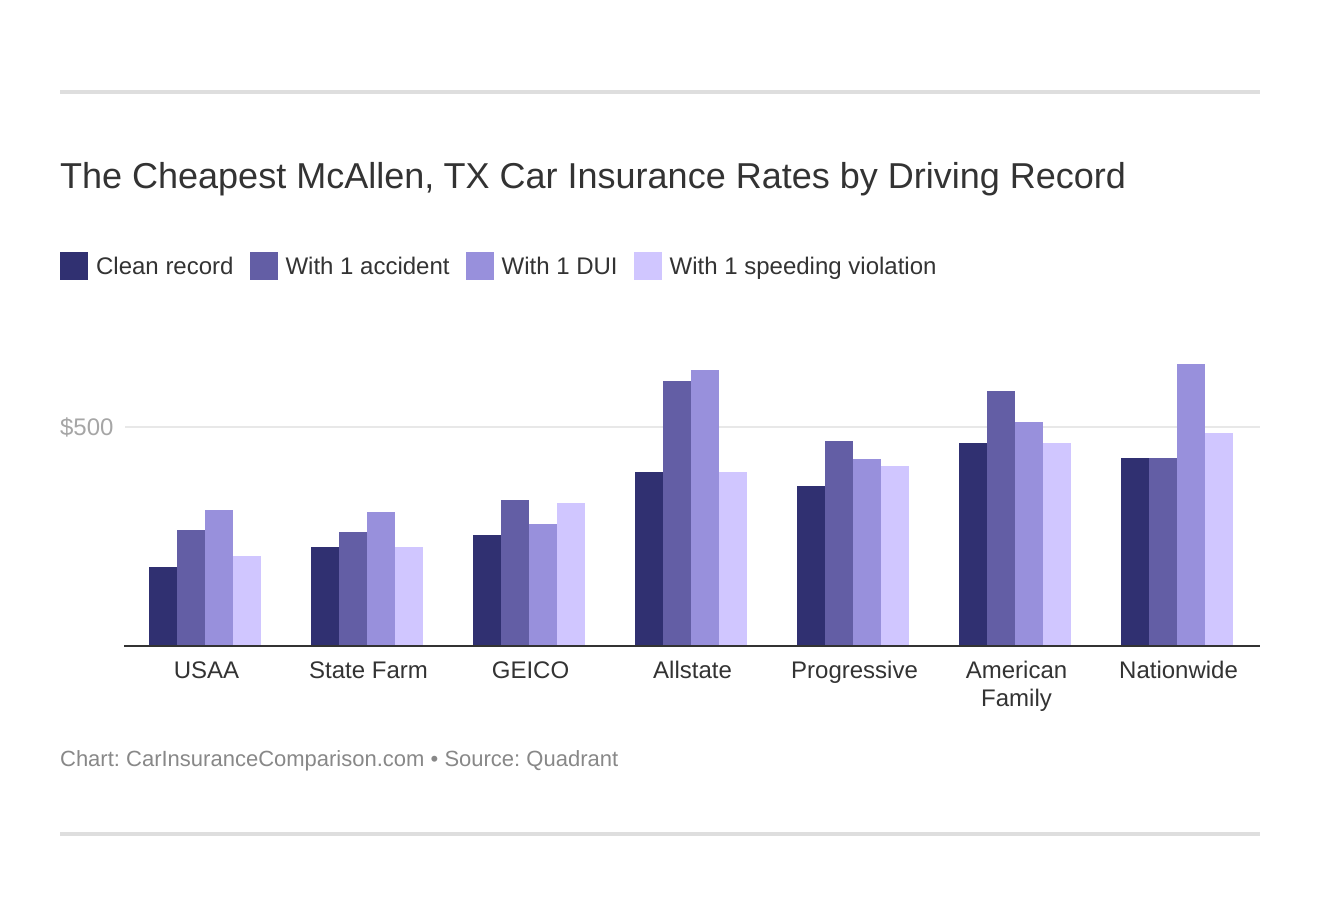 The Cheapest McAllen, TX Car Insurance Rates by Driving Record